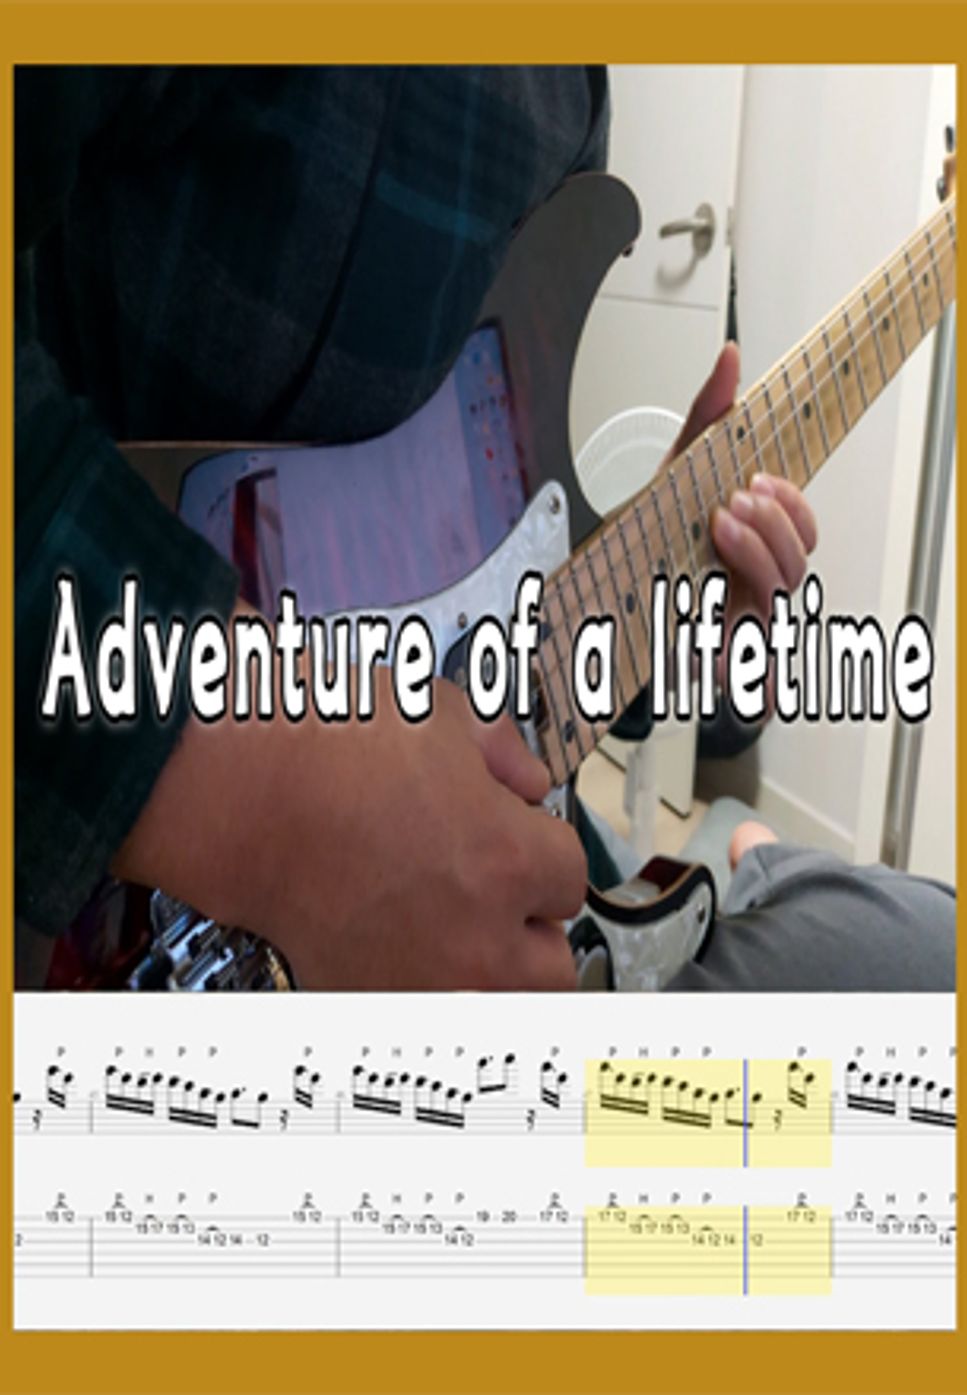 coldplay - Adventure of a lifetime by joguitar